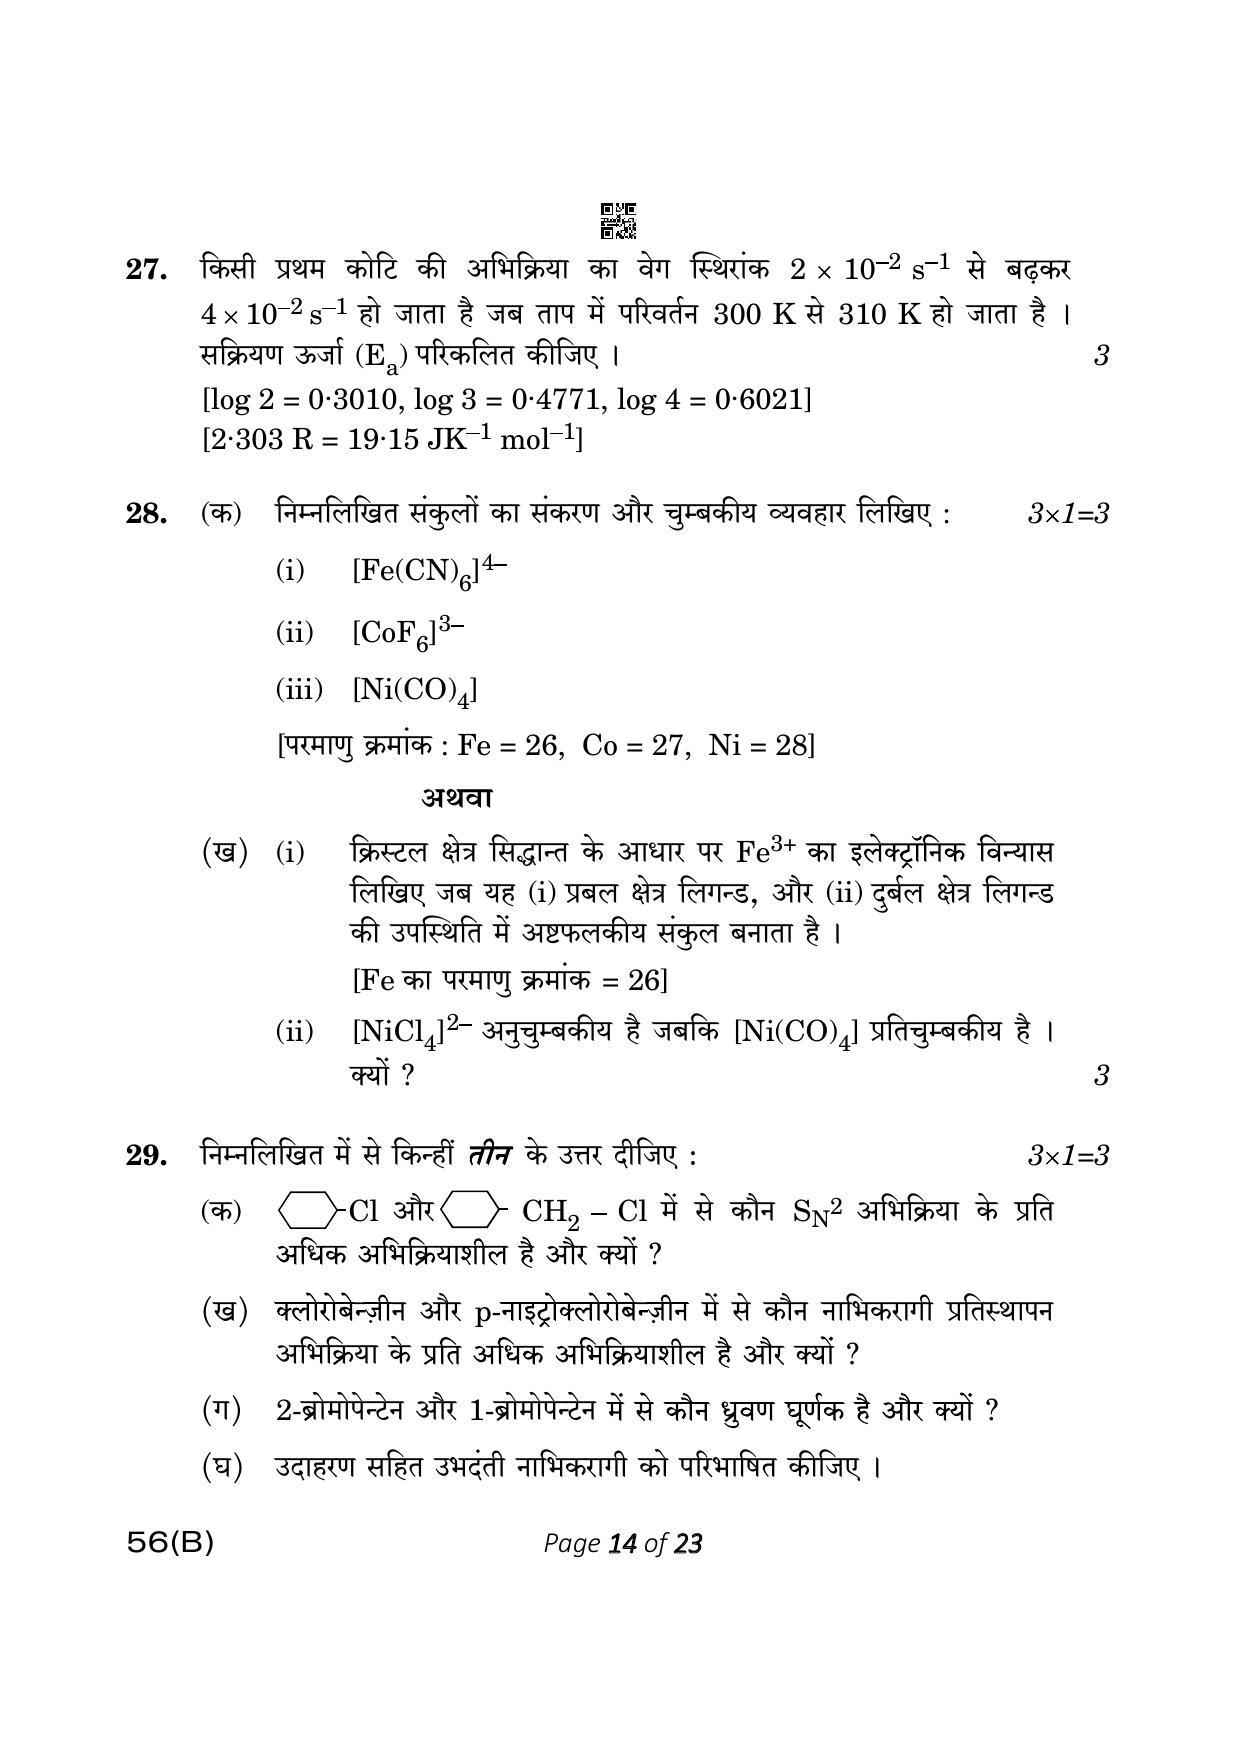 CBSE Class 12 56-B Chemistry 2023 (Compartment) Question Paper - Page 14